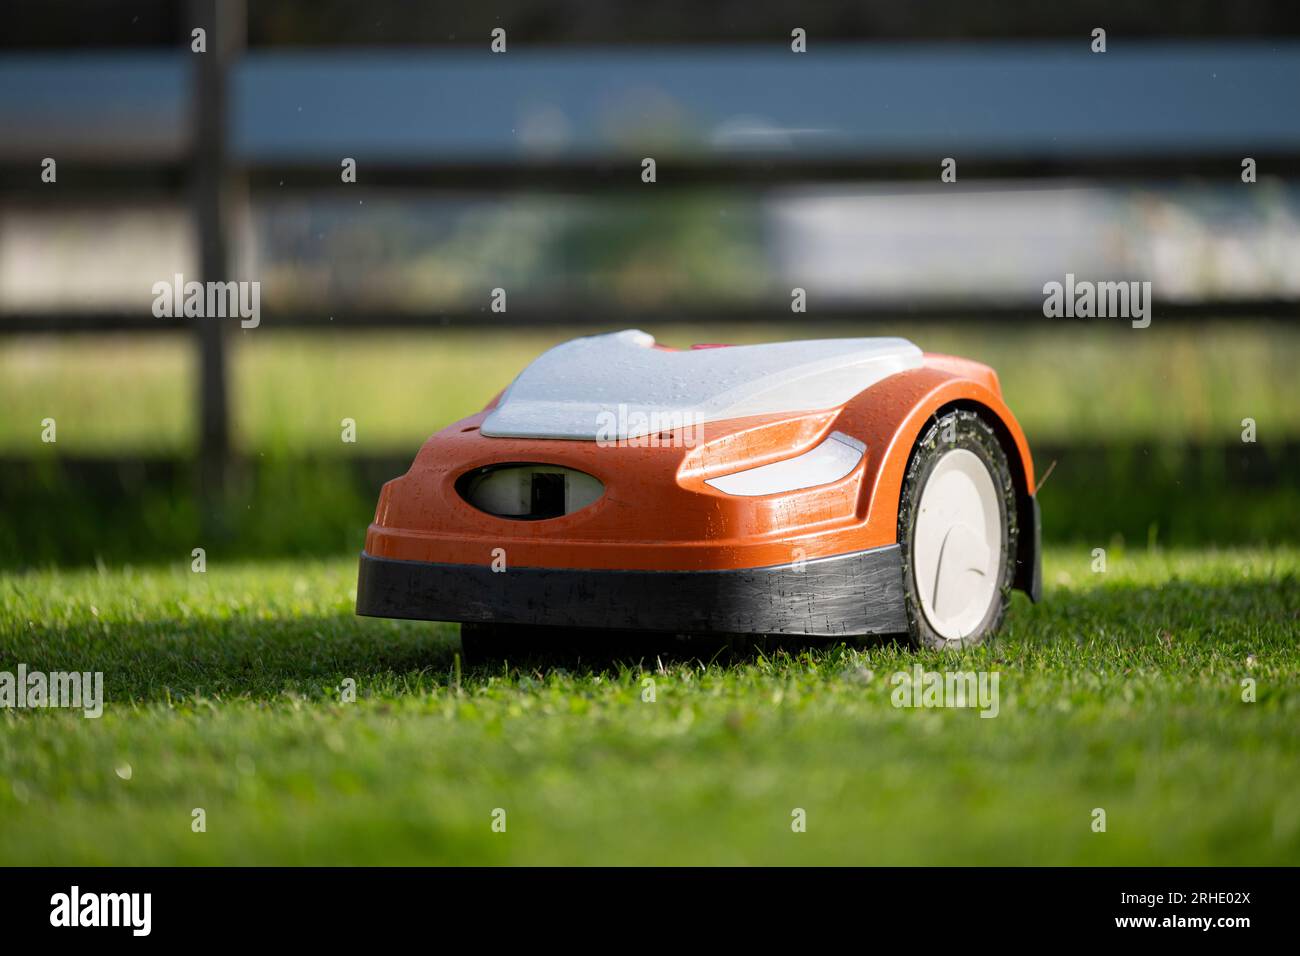 robotic lawn mower at work in a fenced yard with freshly cut green lush grass Stock Photo